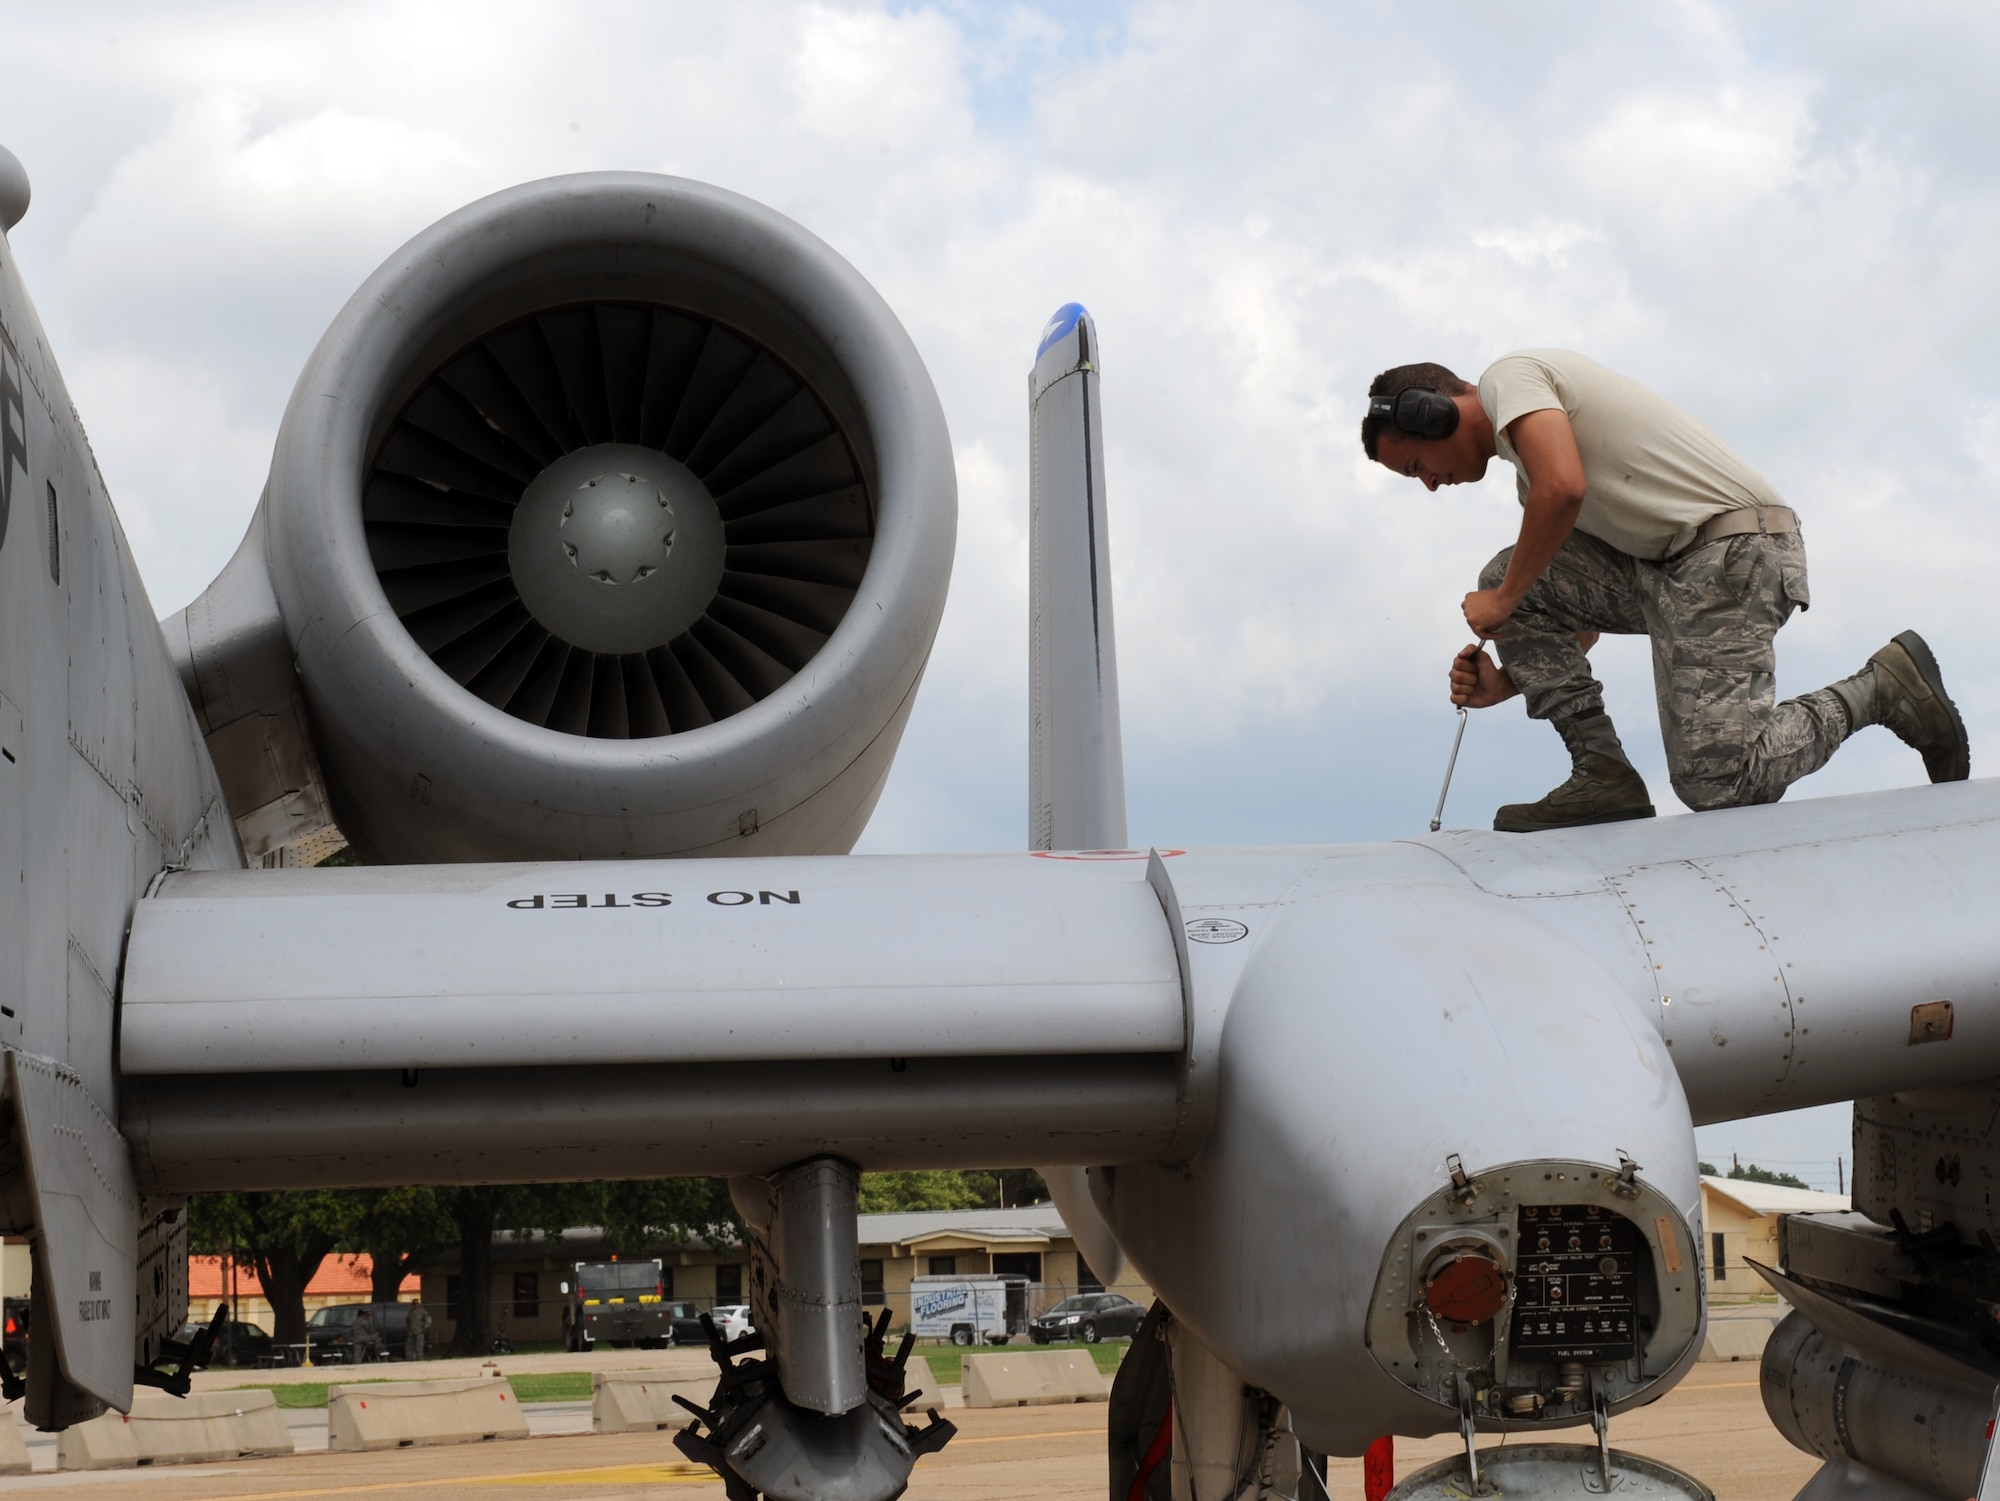 Airman 1st Class Alejandro Cordero, a crew chief from Moody Air Force Base, Ga., tightens a bolt on an A-10 Thunderbolt II fighter on Barksdale Air Force Base, La., June 4, 2013. During flight, nuts and bolts come loose because of vibrations from the plane. Crew chiefs must ensure all nuts and bolts are tightened or replaced after flight. (U.S. Air Force photo/Airman 1st Class Benjamin Gonsier)